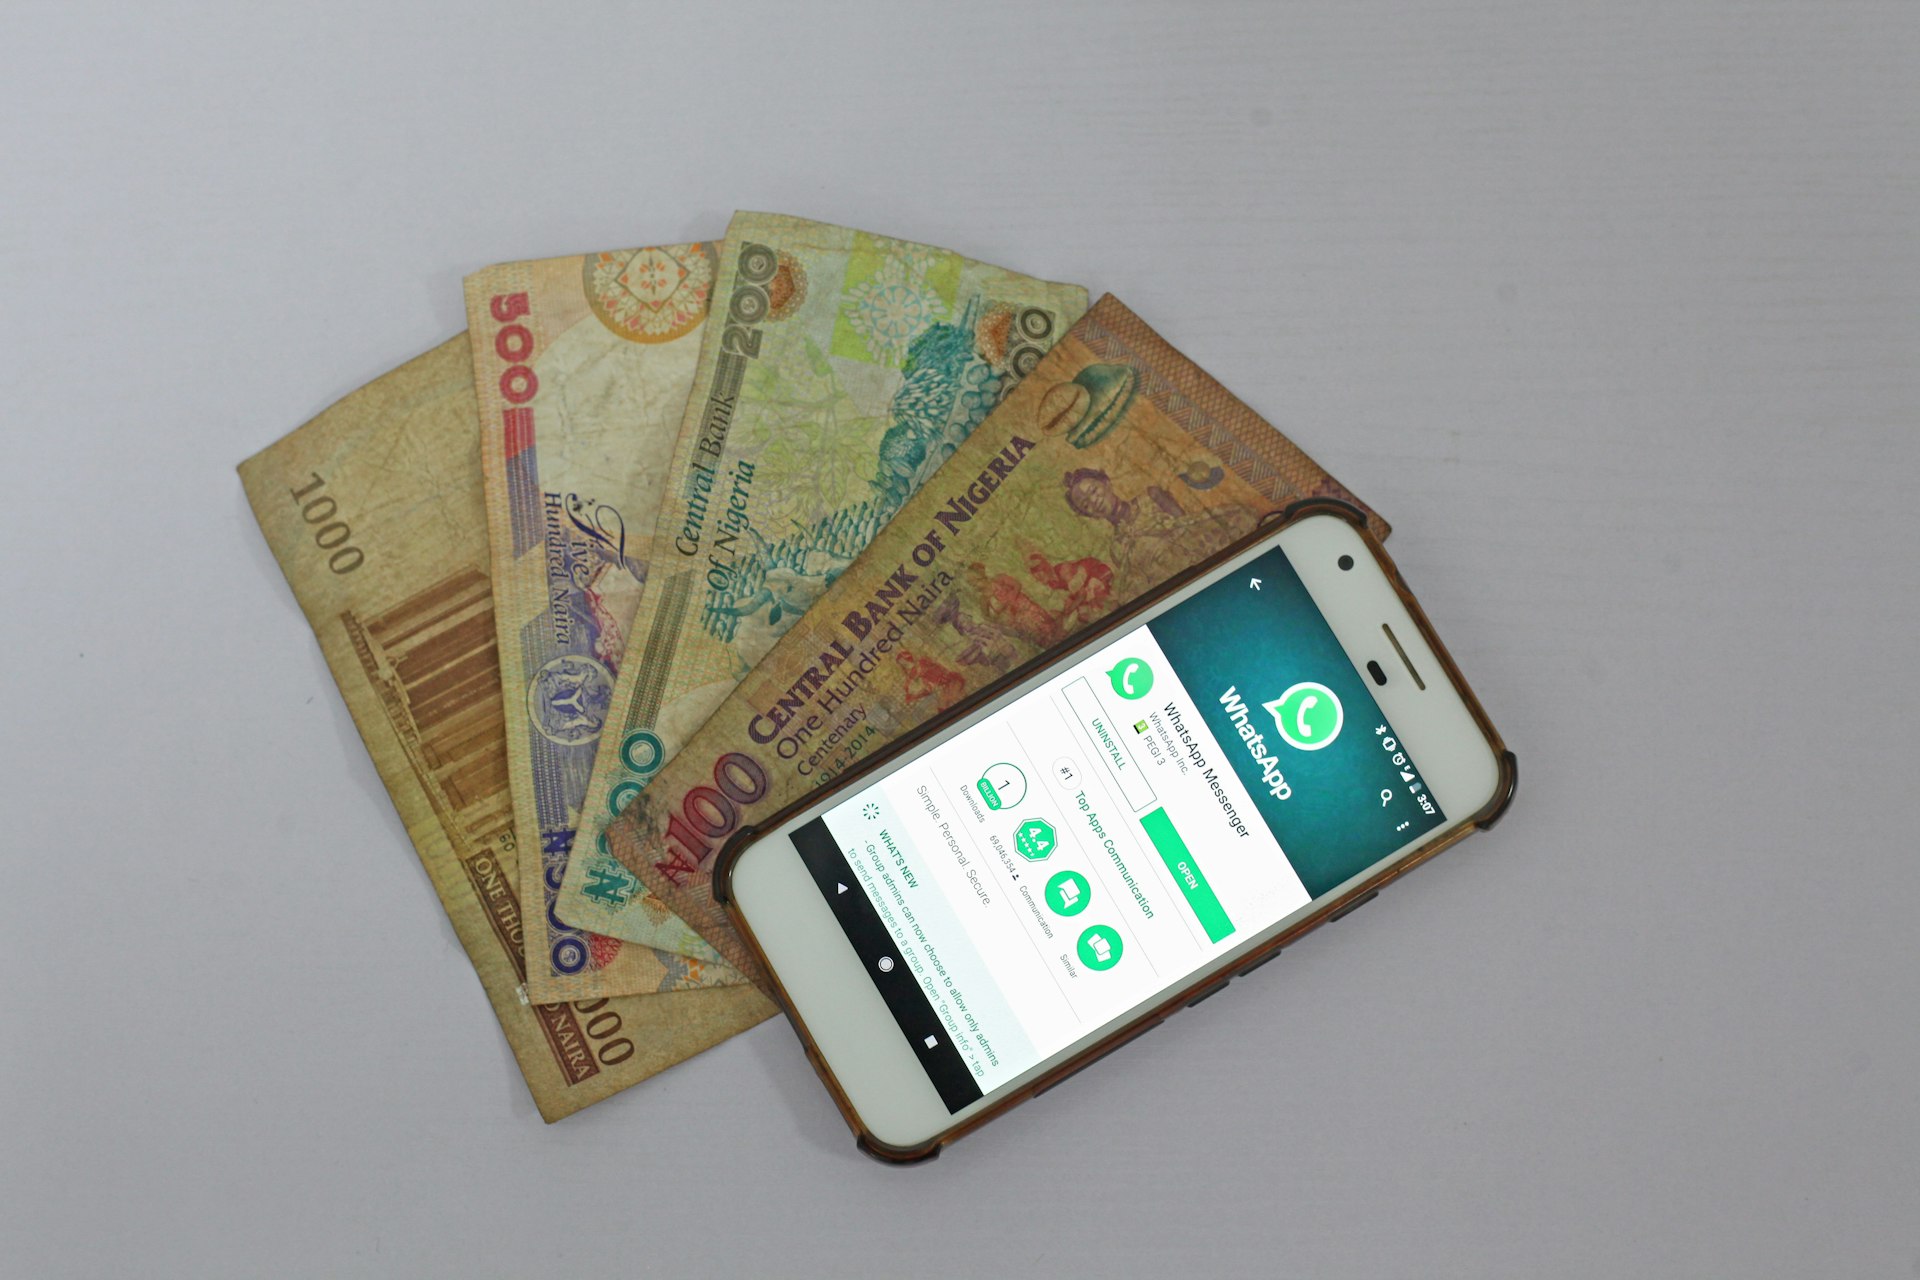 Nigerian Naira next to a used Android phone with WhatsApp.